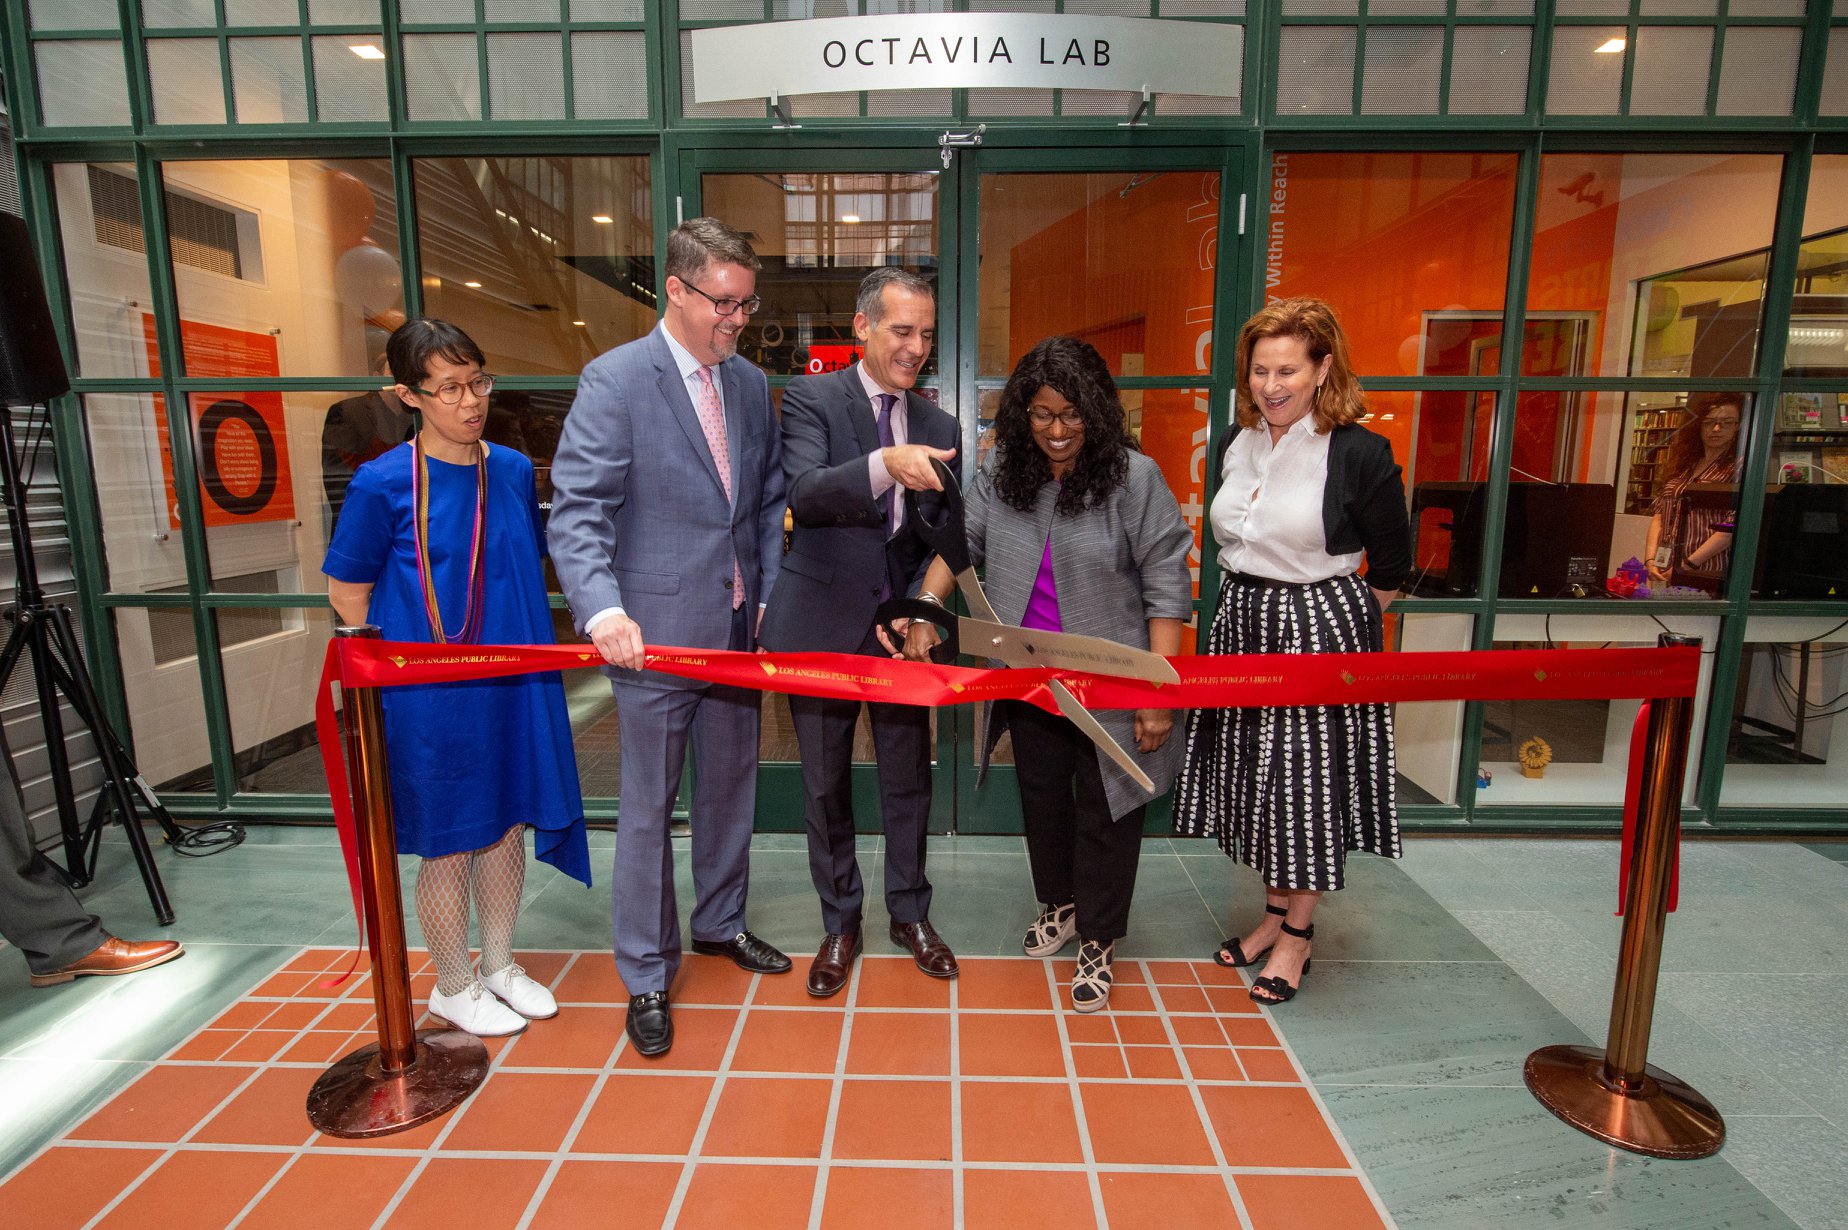 Los Angeles Public Library Launches the Octavia Lab